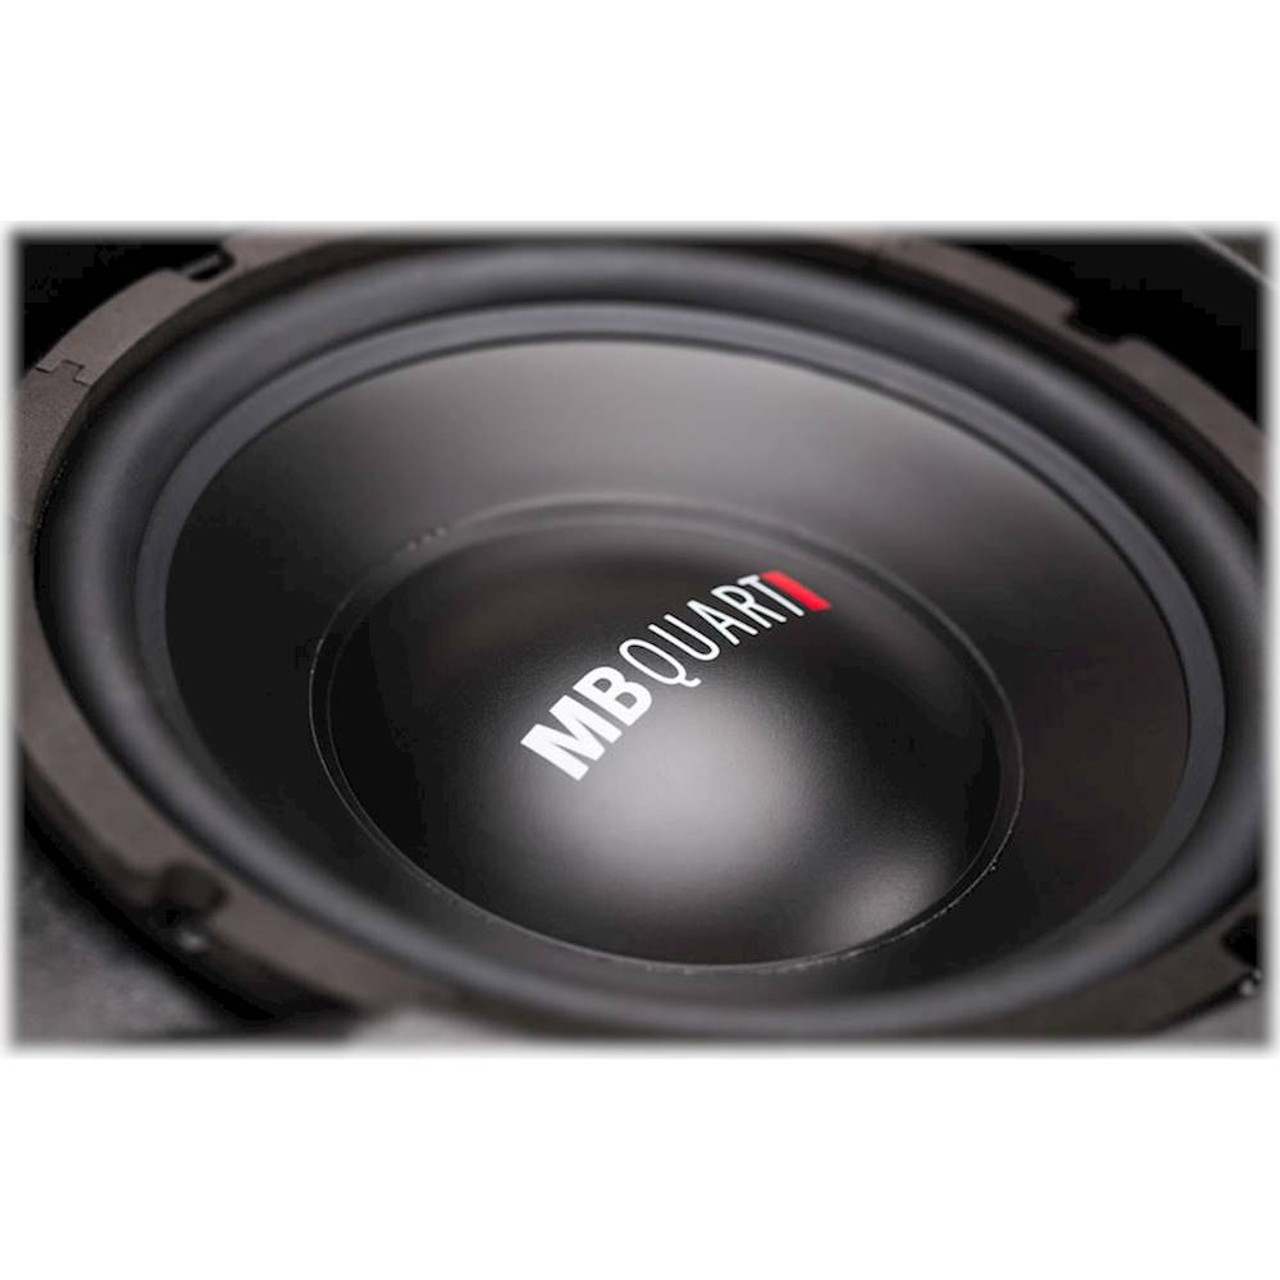 MB Quart - 10" Dual-Voice-Coil 4-Ohm Loaded Subwoofer Enclosure with Integrated Amp - Black